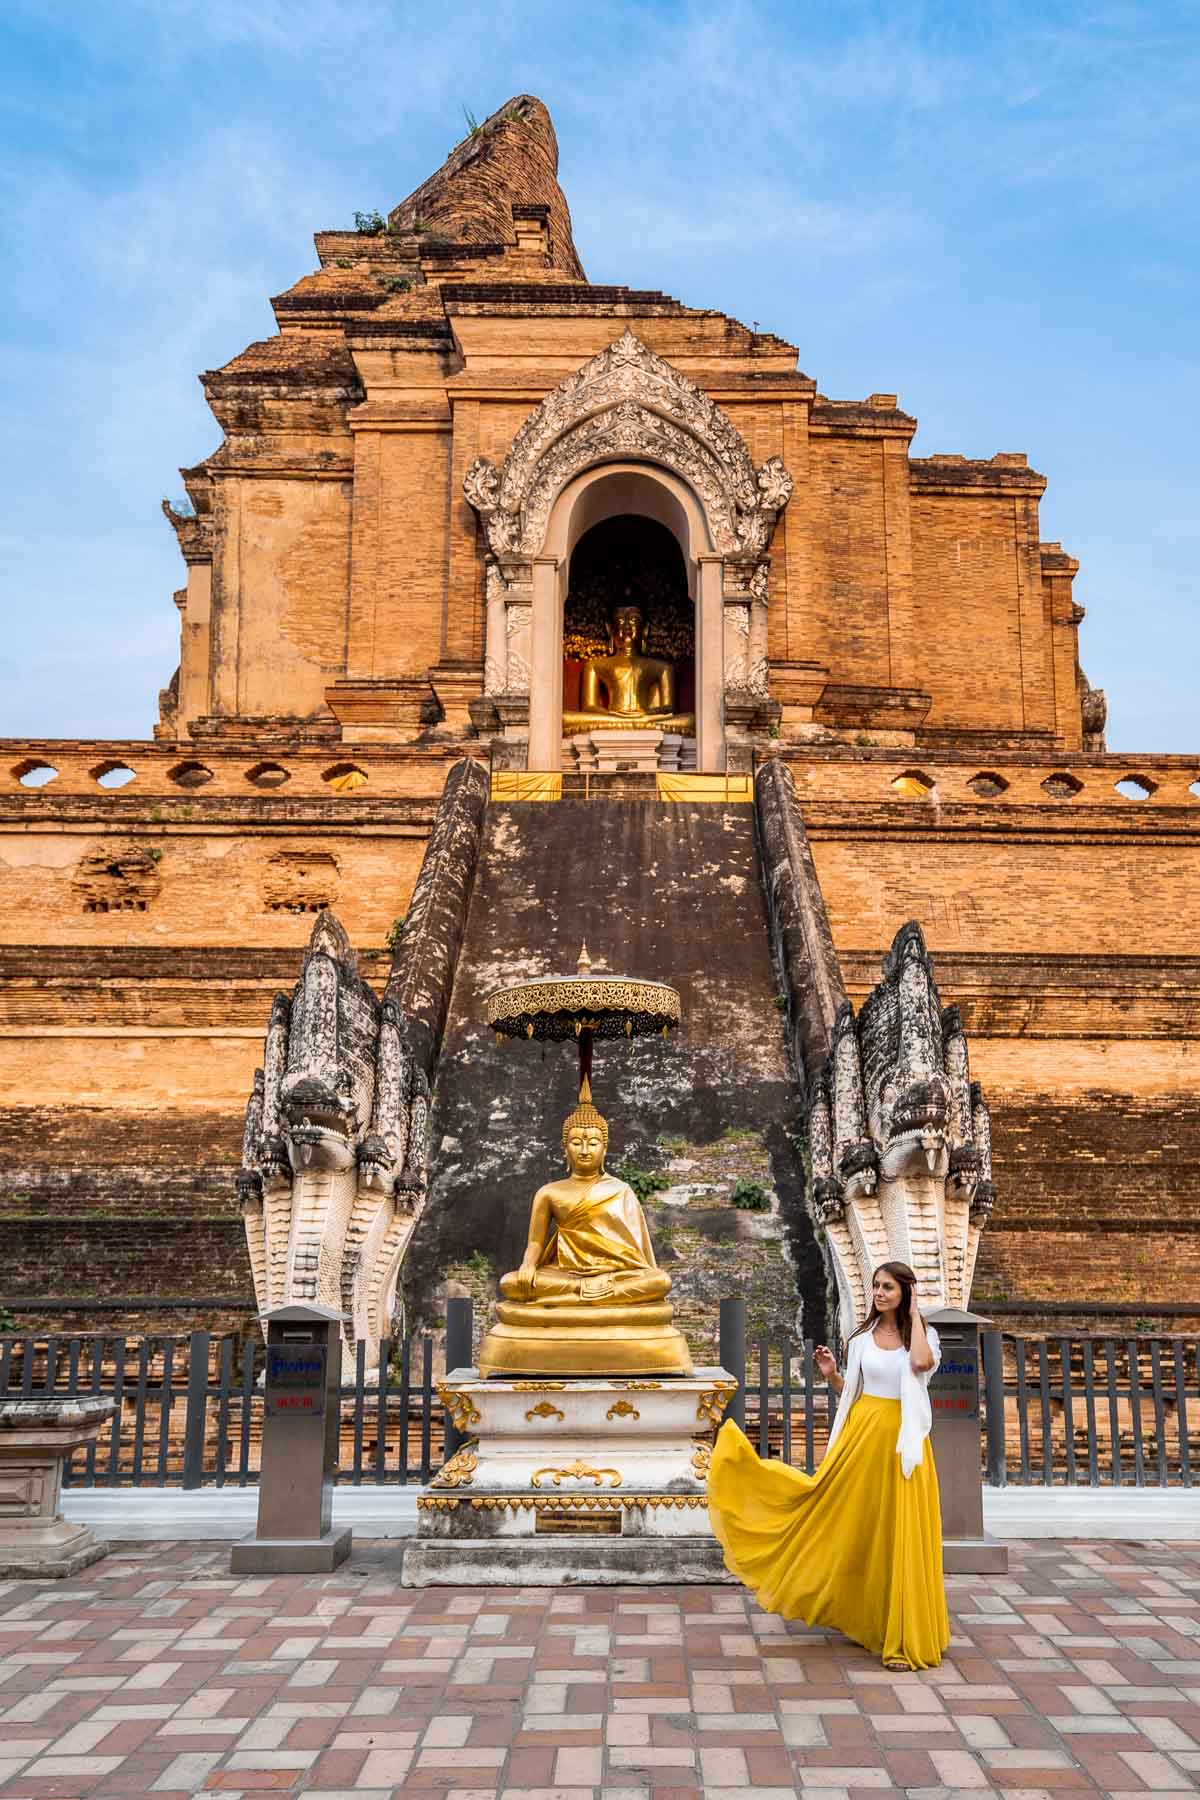 Girl in a yellow skirt in front of the Wat Chedi Luang Temple in Chiang Mai